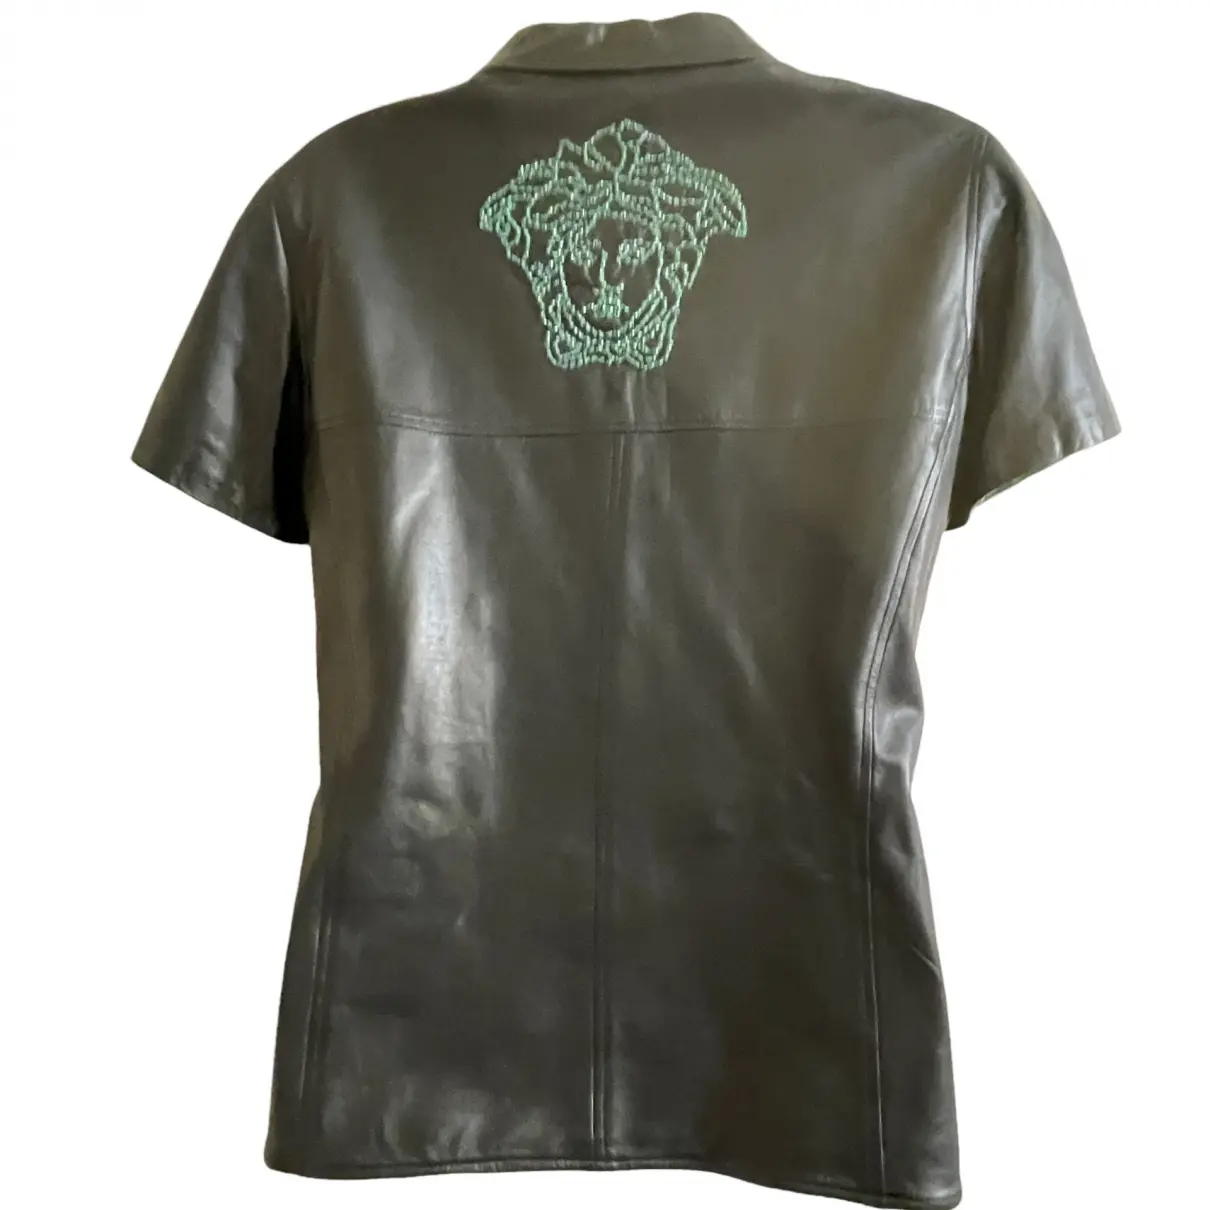 Buy Gianni Versace Leather shirt online - Vintage